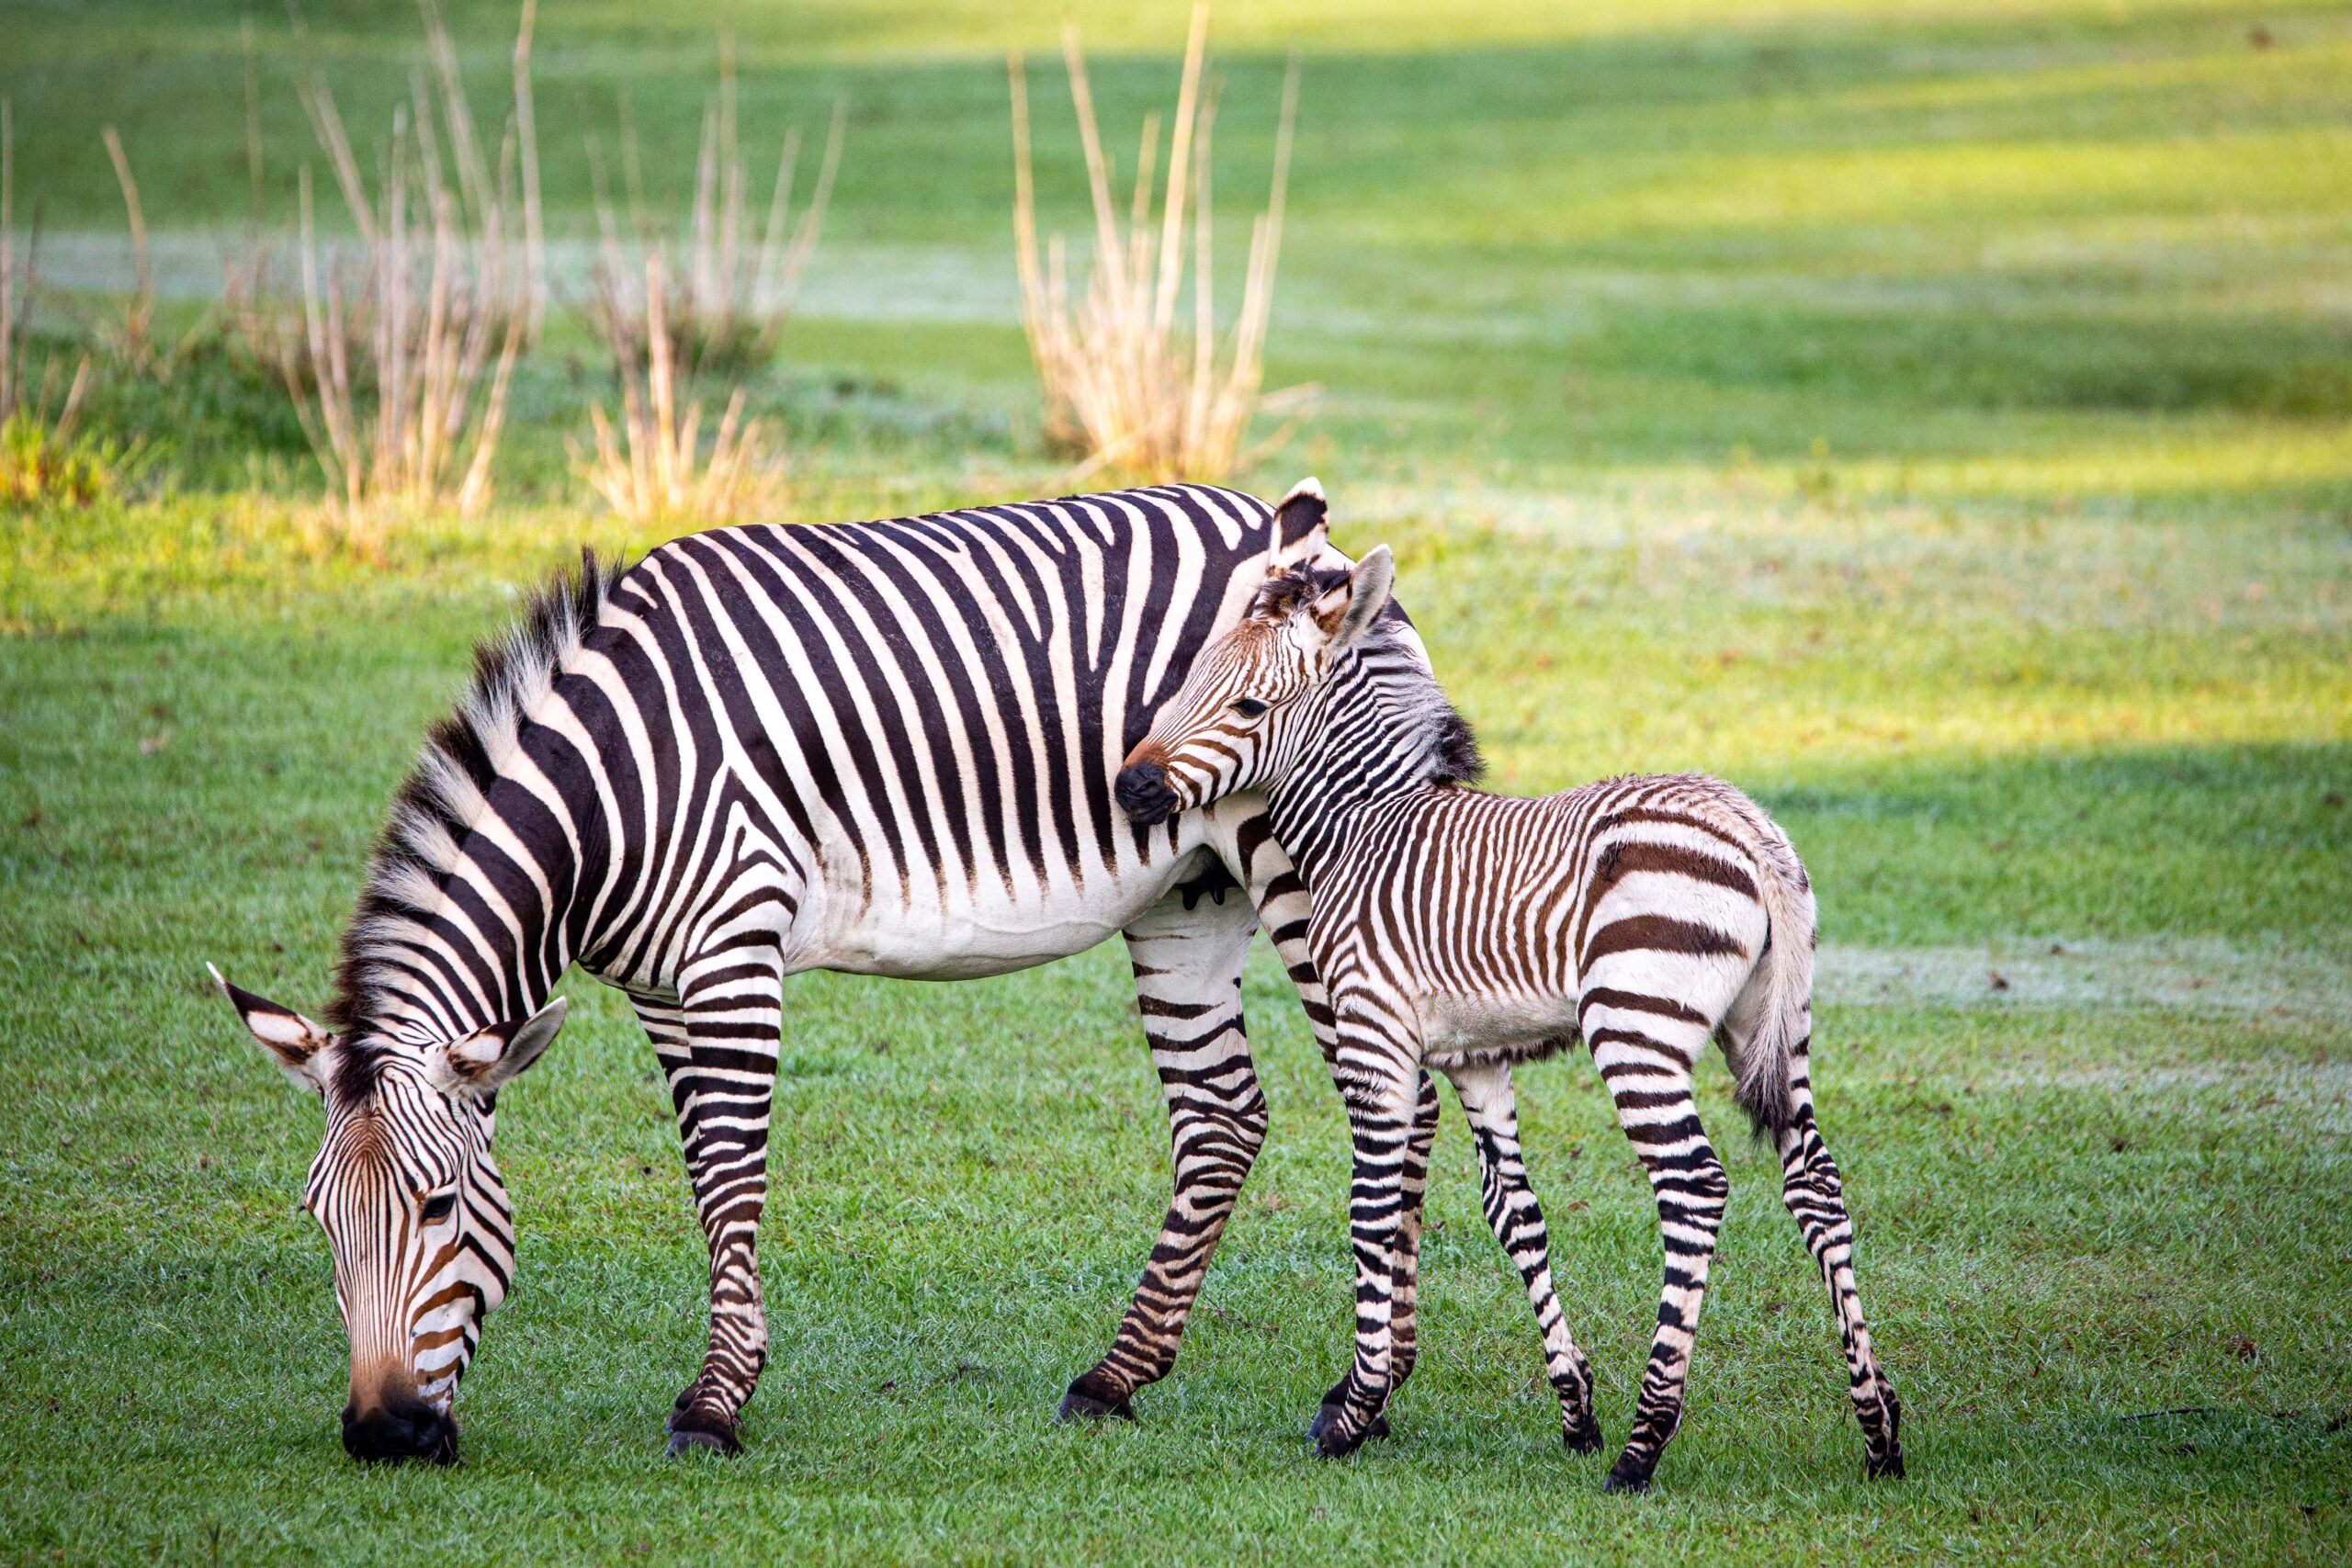 Walt Disney World Resort has welcomed the birth of more than 300 animal residents in 2023. Two Hartmann's mountain zebra foals recently debuted at Kilimanjaro Safaris in Disney's Animal Kingdom Theme Park. Born just six days apart, Cricket and Dot can be seen prancing around the savanna with their parents. (Aaron Wockenfuss, Photographer)